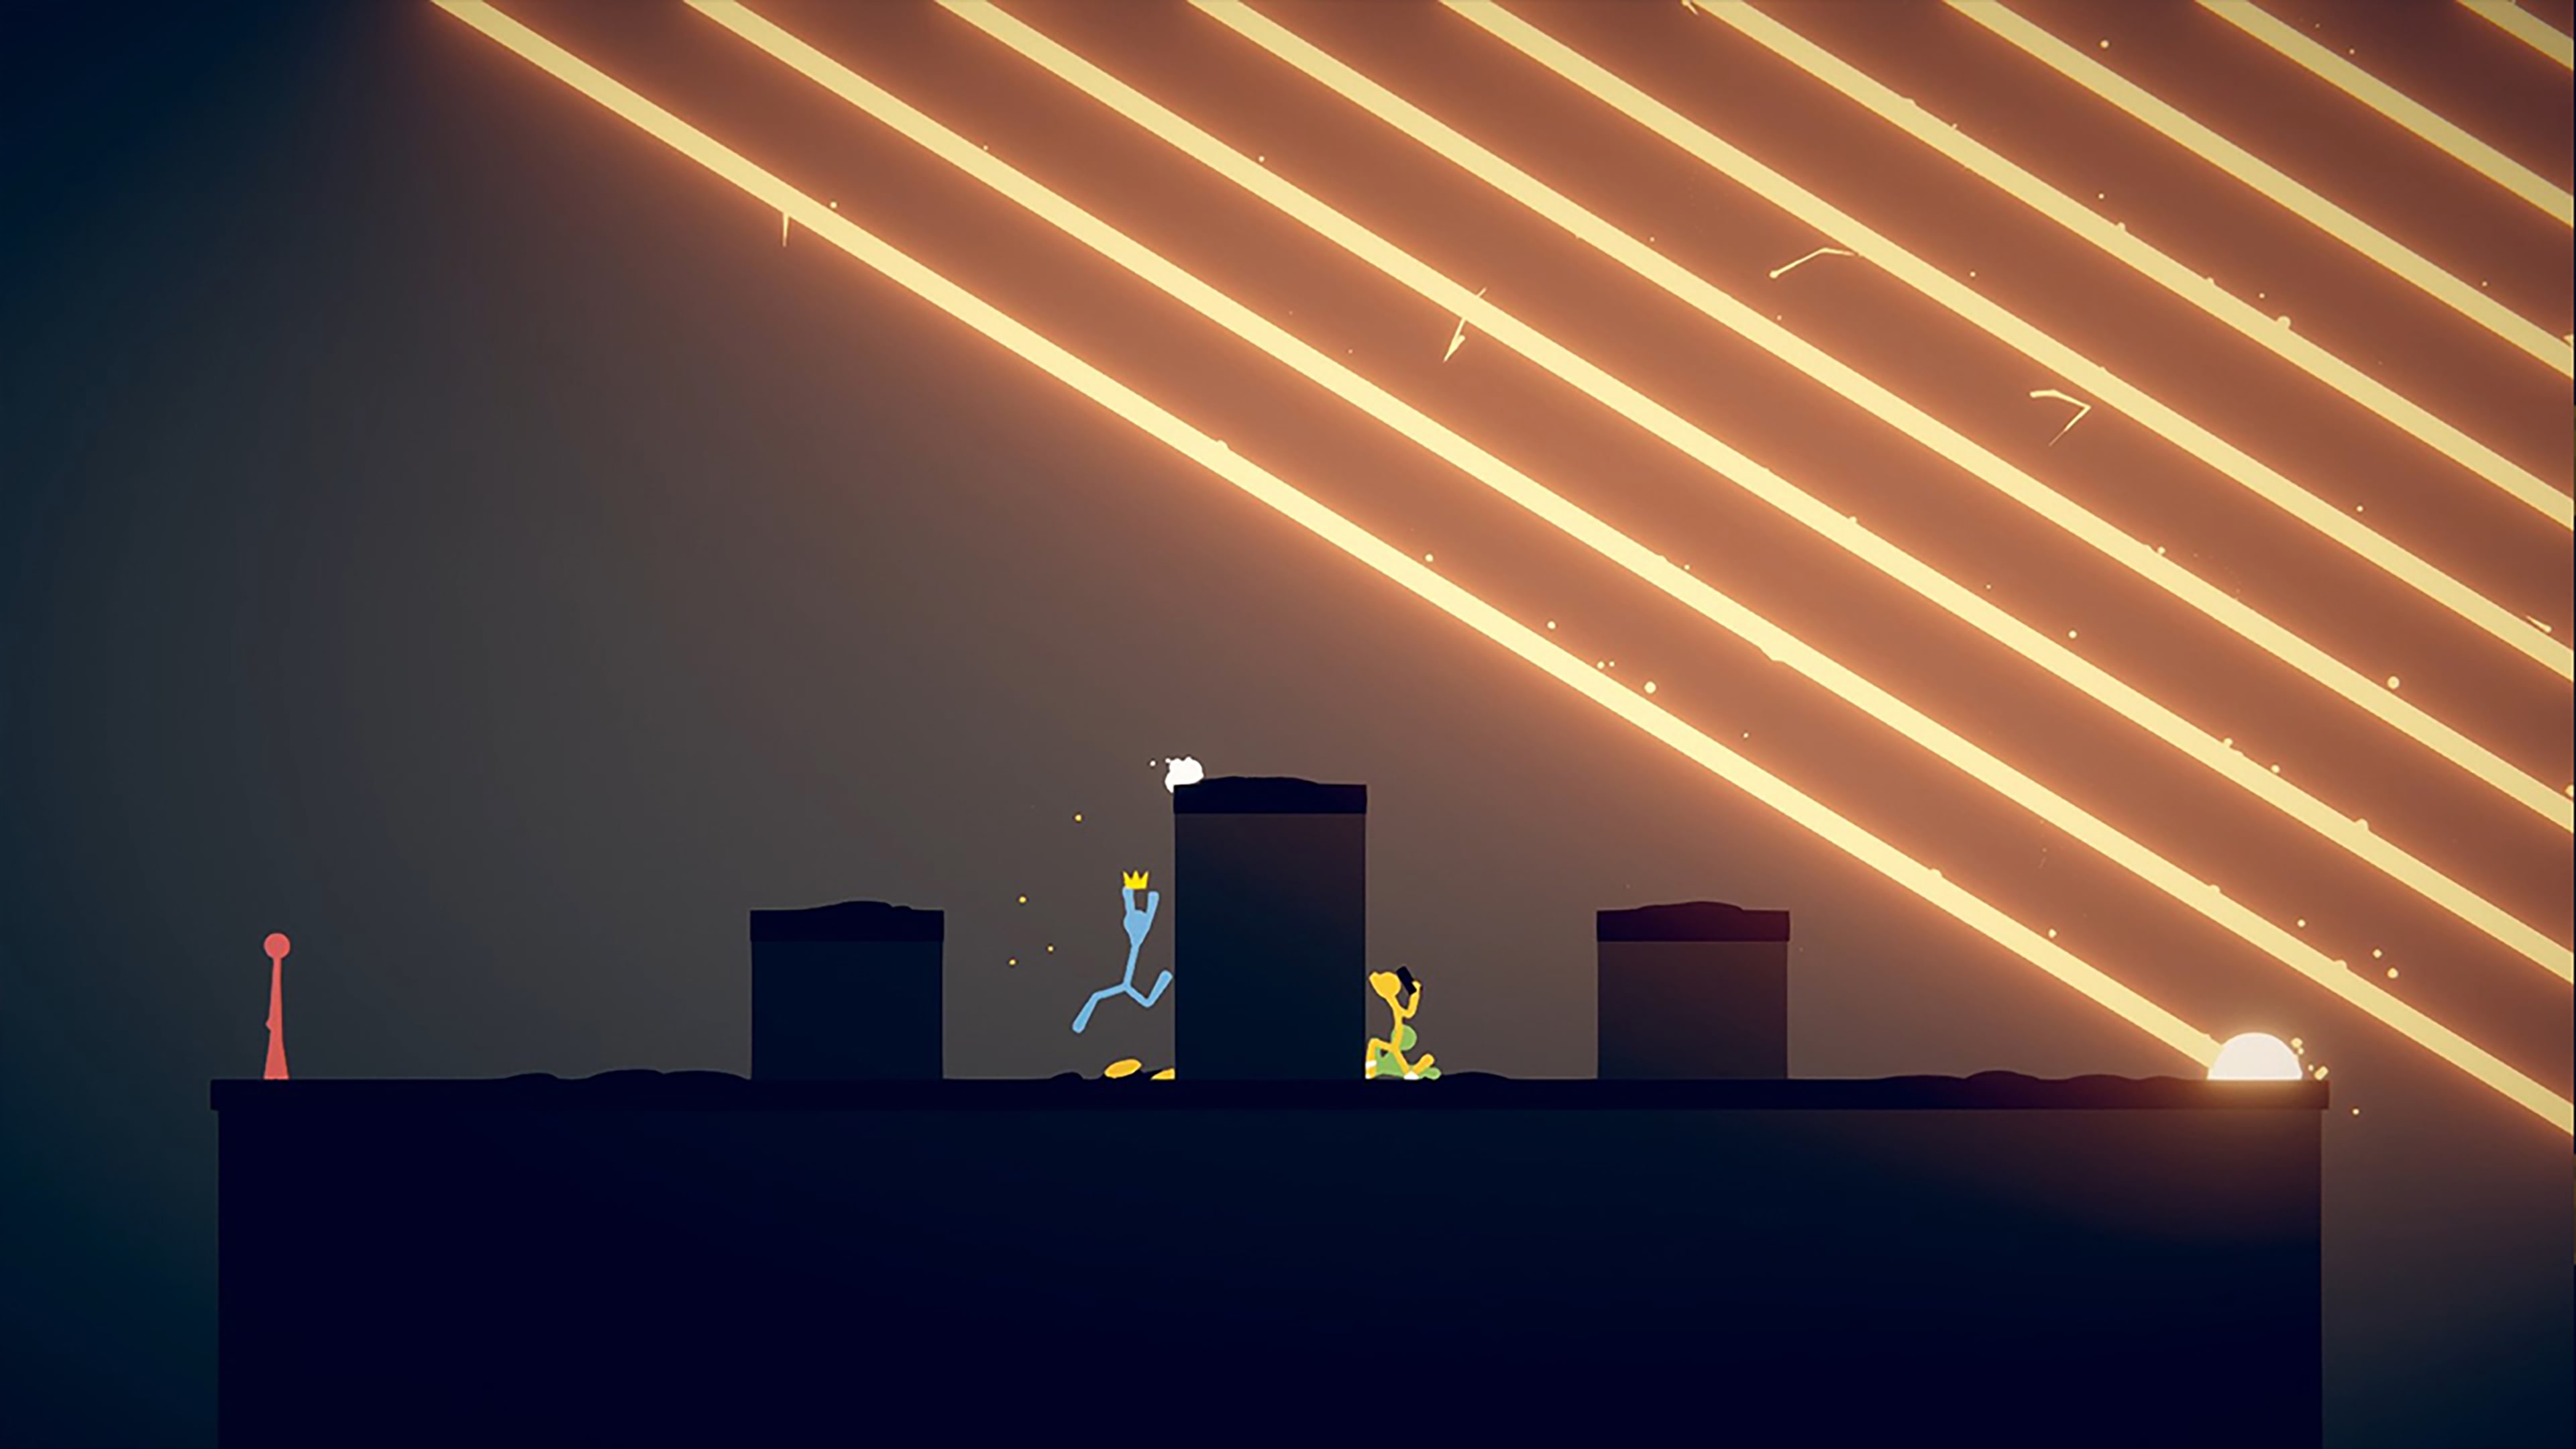 Buy Stick Fight The Game PS4 Compare Prices